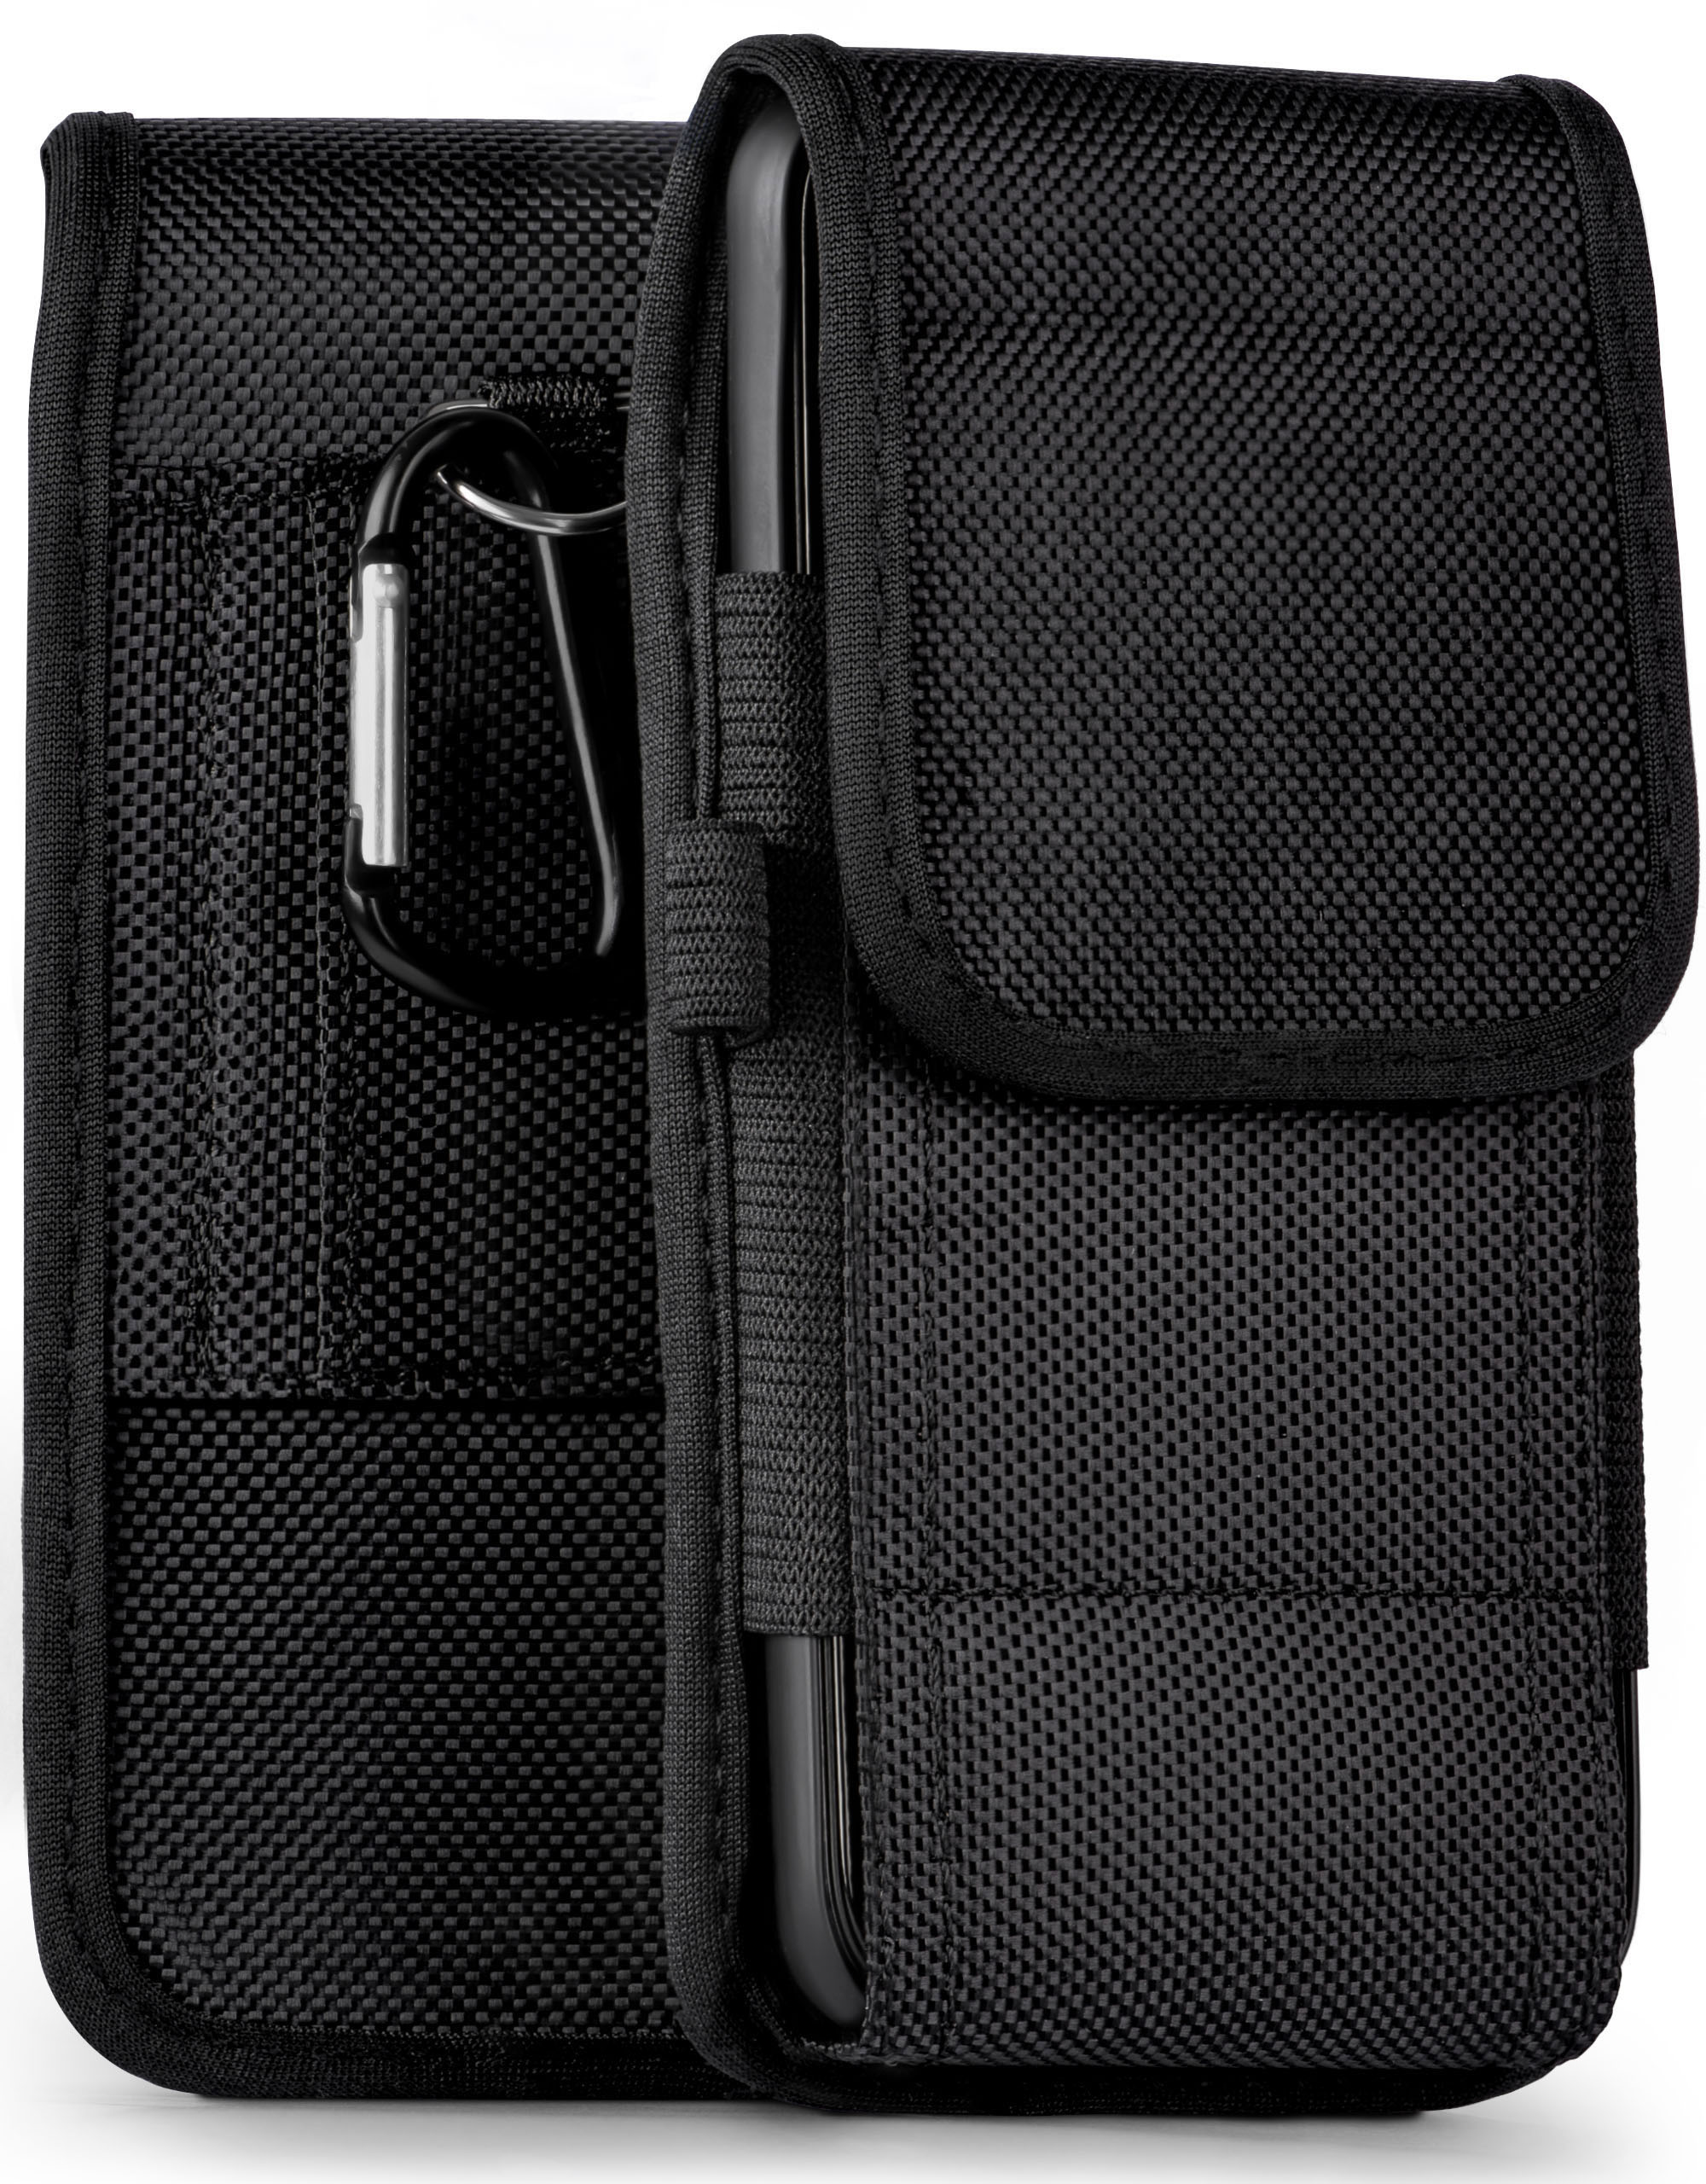 Case, Trail Agility Lite, X2 MOEX Find Holster, Oppo,